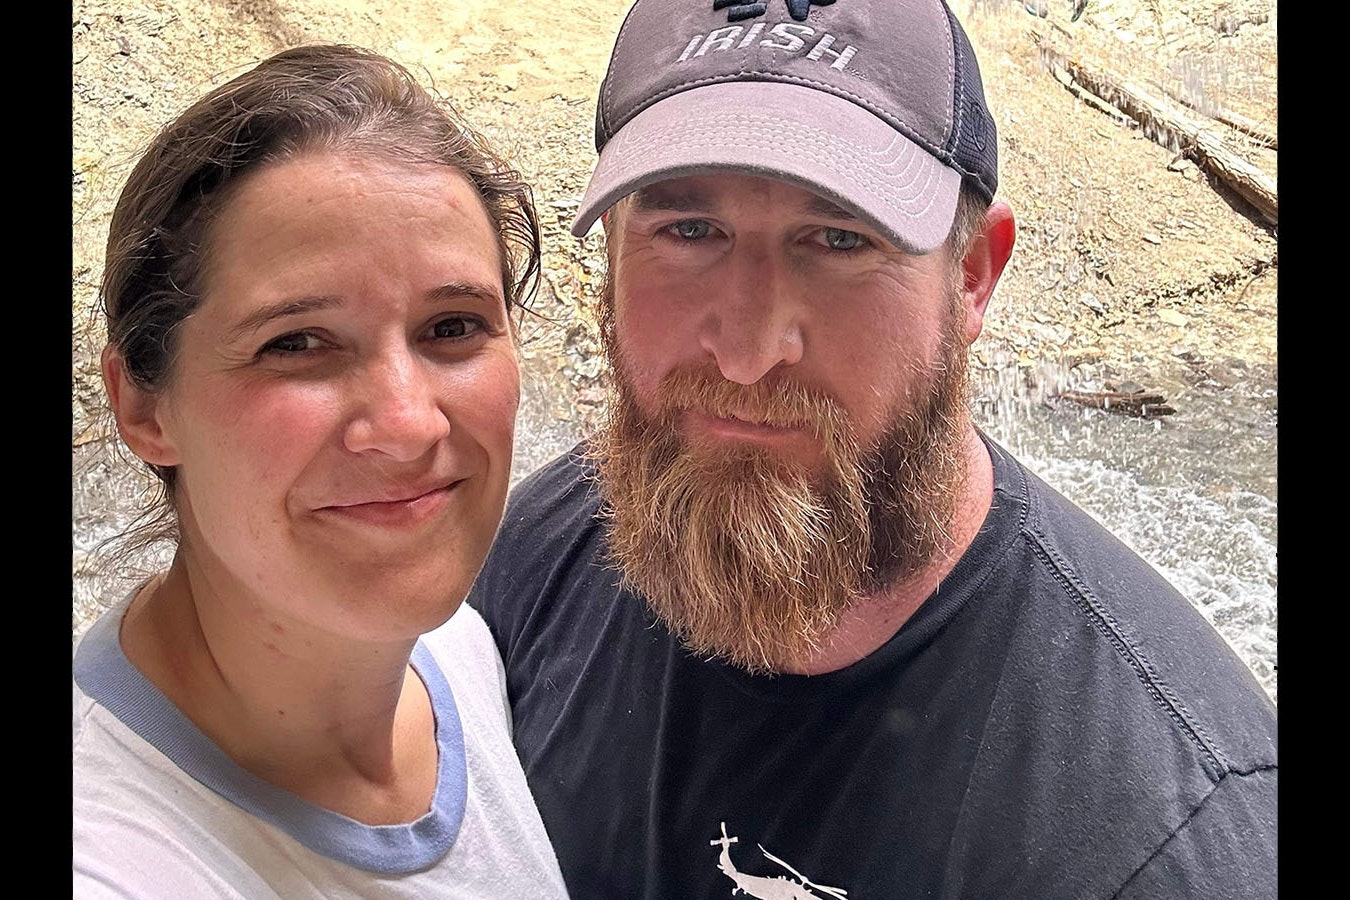 Sean and Ashley Willey of Rock Springs say that since they sued Sweetwater County School District No. 1 for allegedly gender transitioning their teen behind their backs that other local parents have told them they had similar experiences with the district.